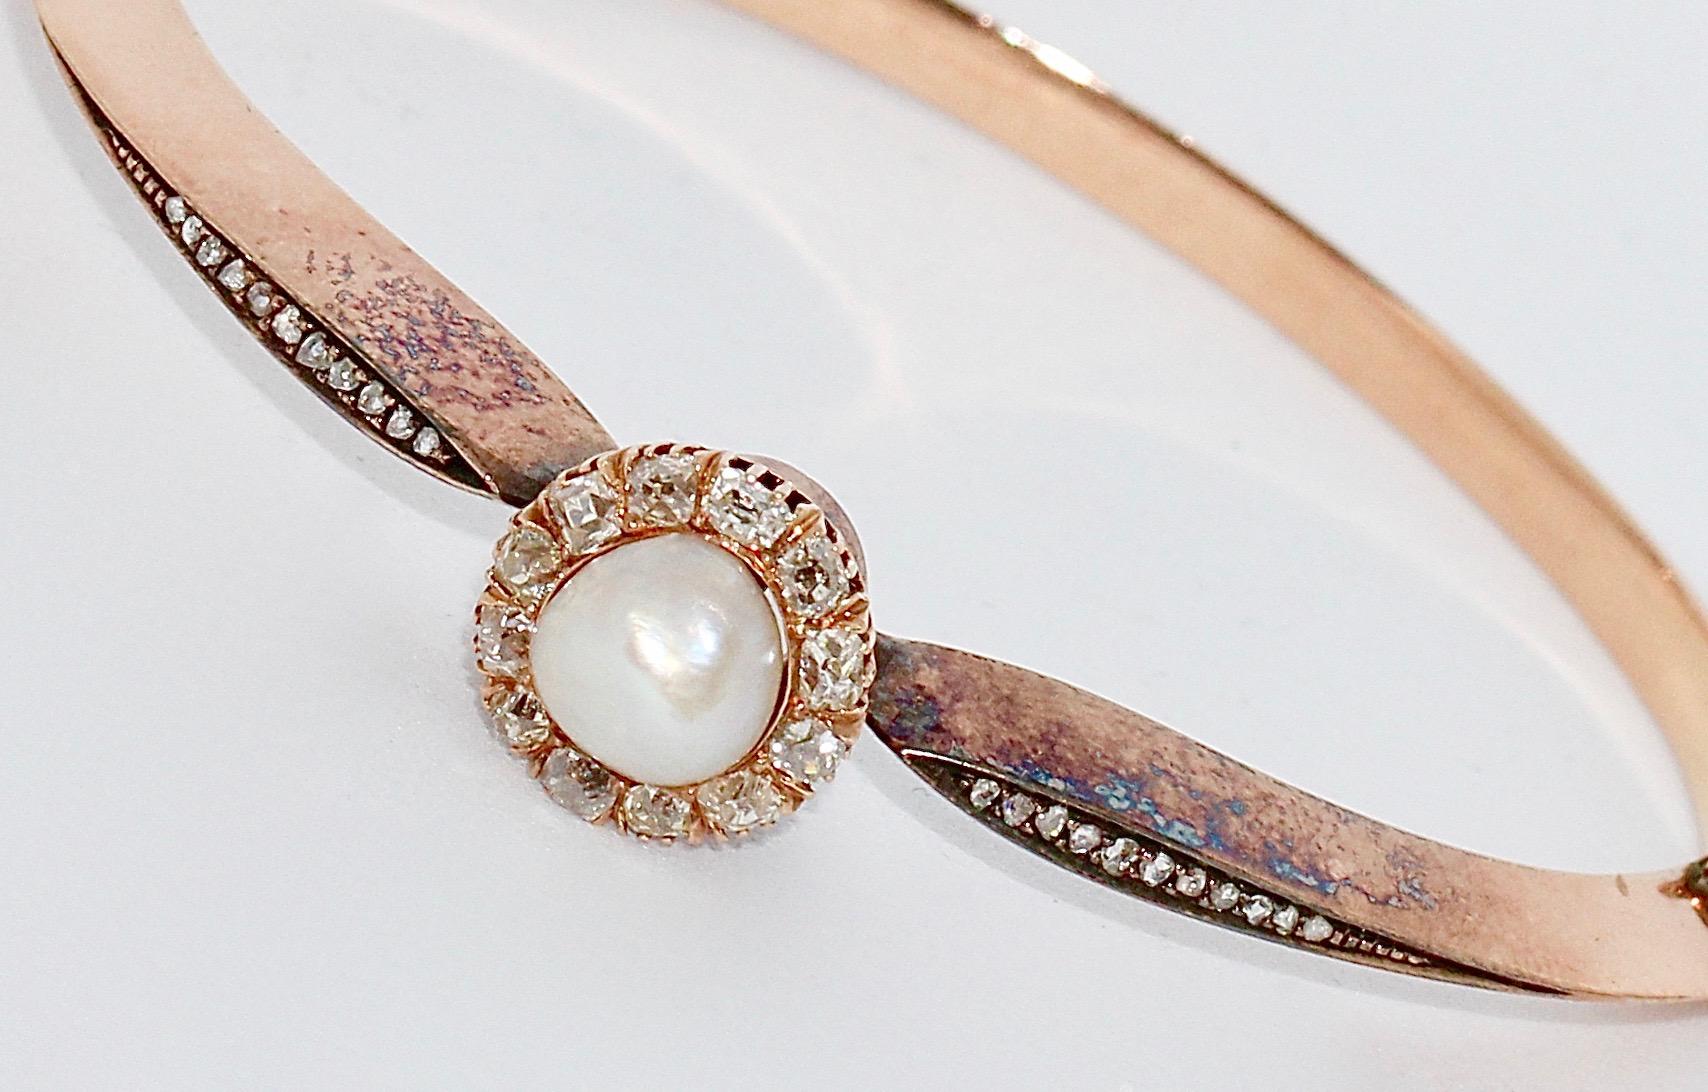 Antique Bangle, 14 Karat Gold, with Natural Pearl and Diamonds. 

Diameter of the pearl is about 7.5mm